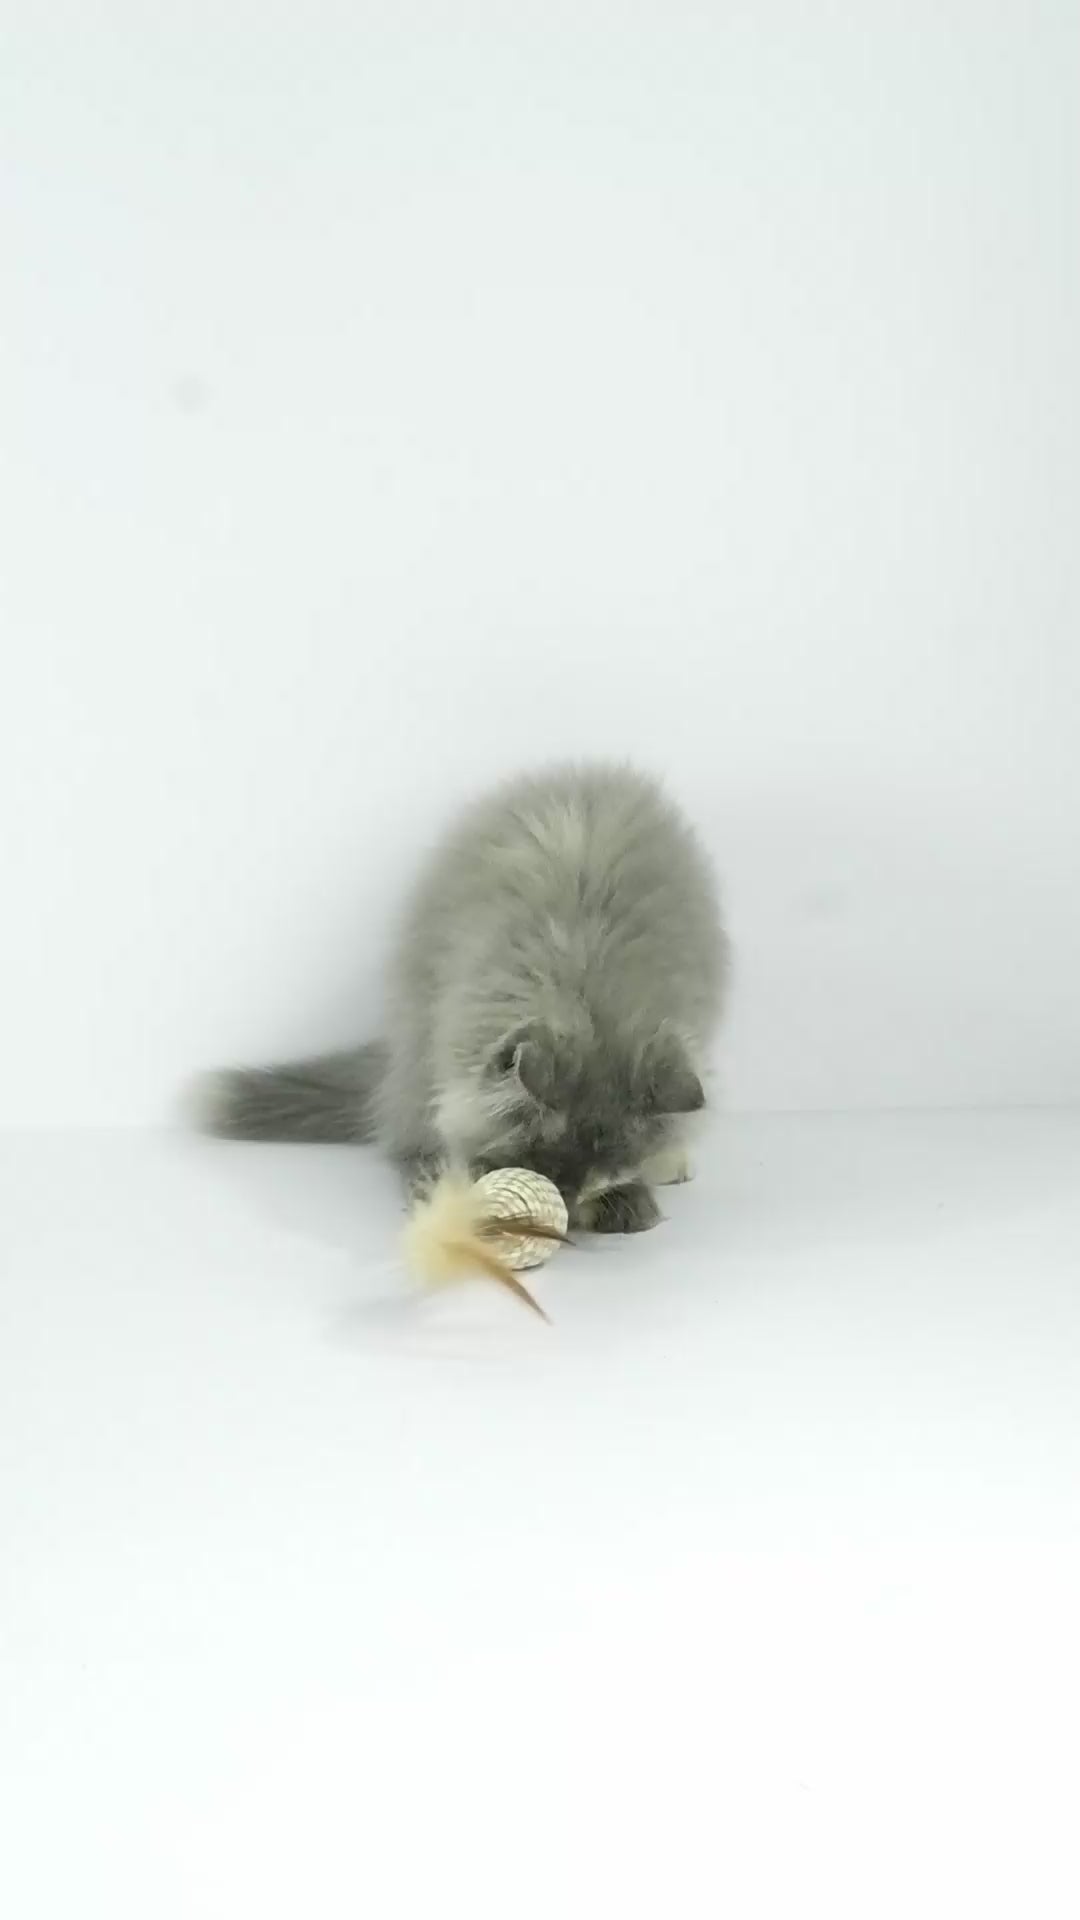 Trixie Matatabi Feather Game Toy for Cats